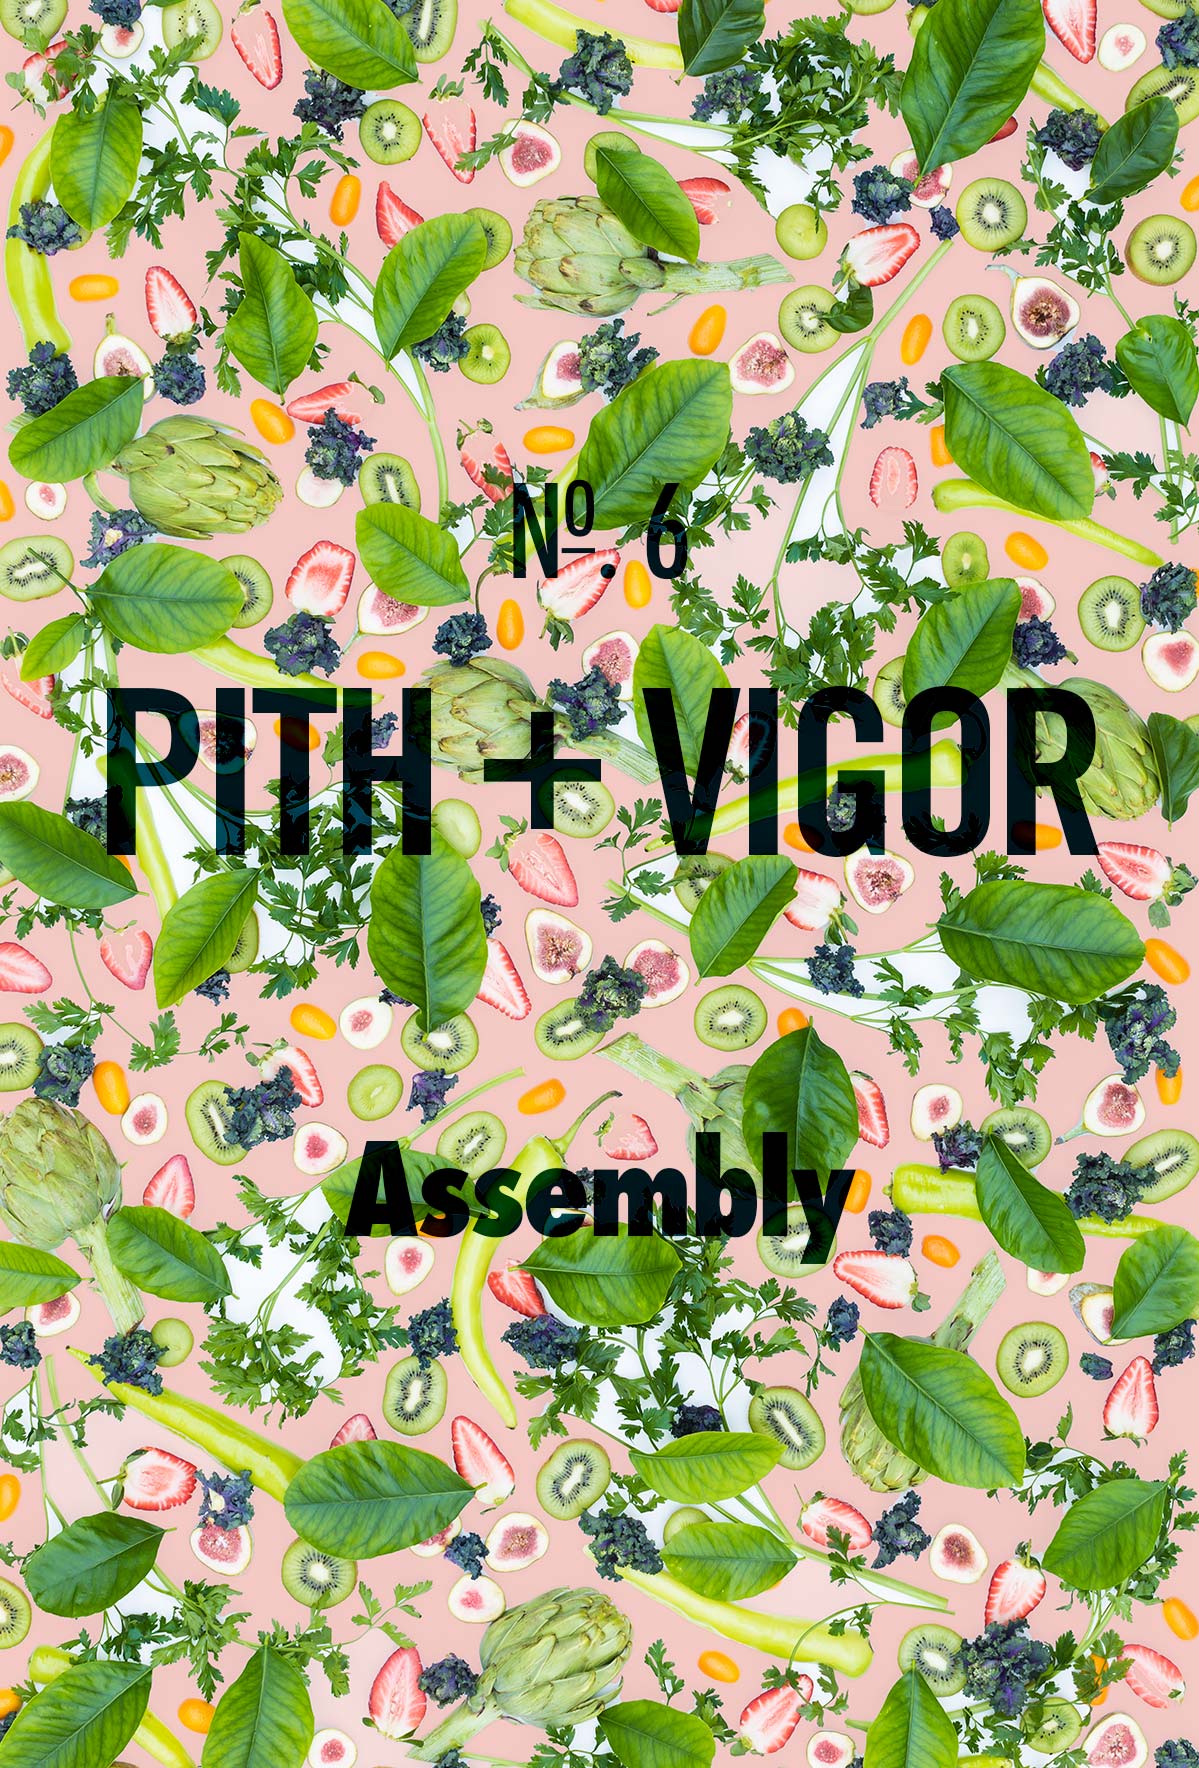 Welcome to Issue No. 6 of Pith + Vigor. The theme was Assembly this issue shares a wide variety if stories about coming together, assembling, and making.